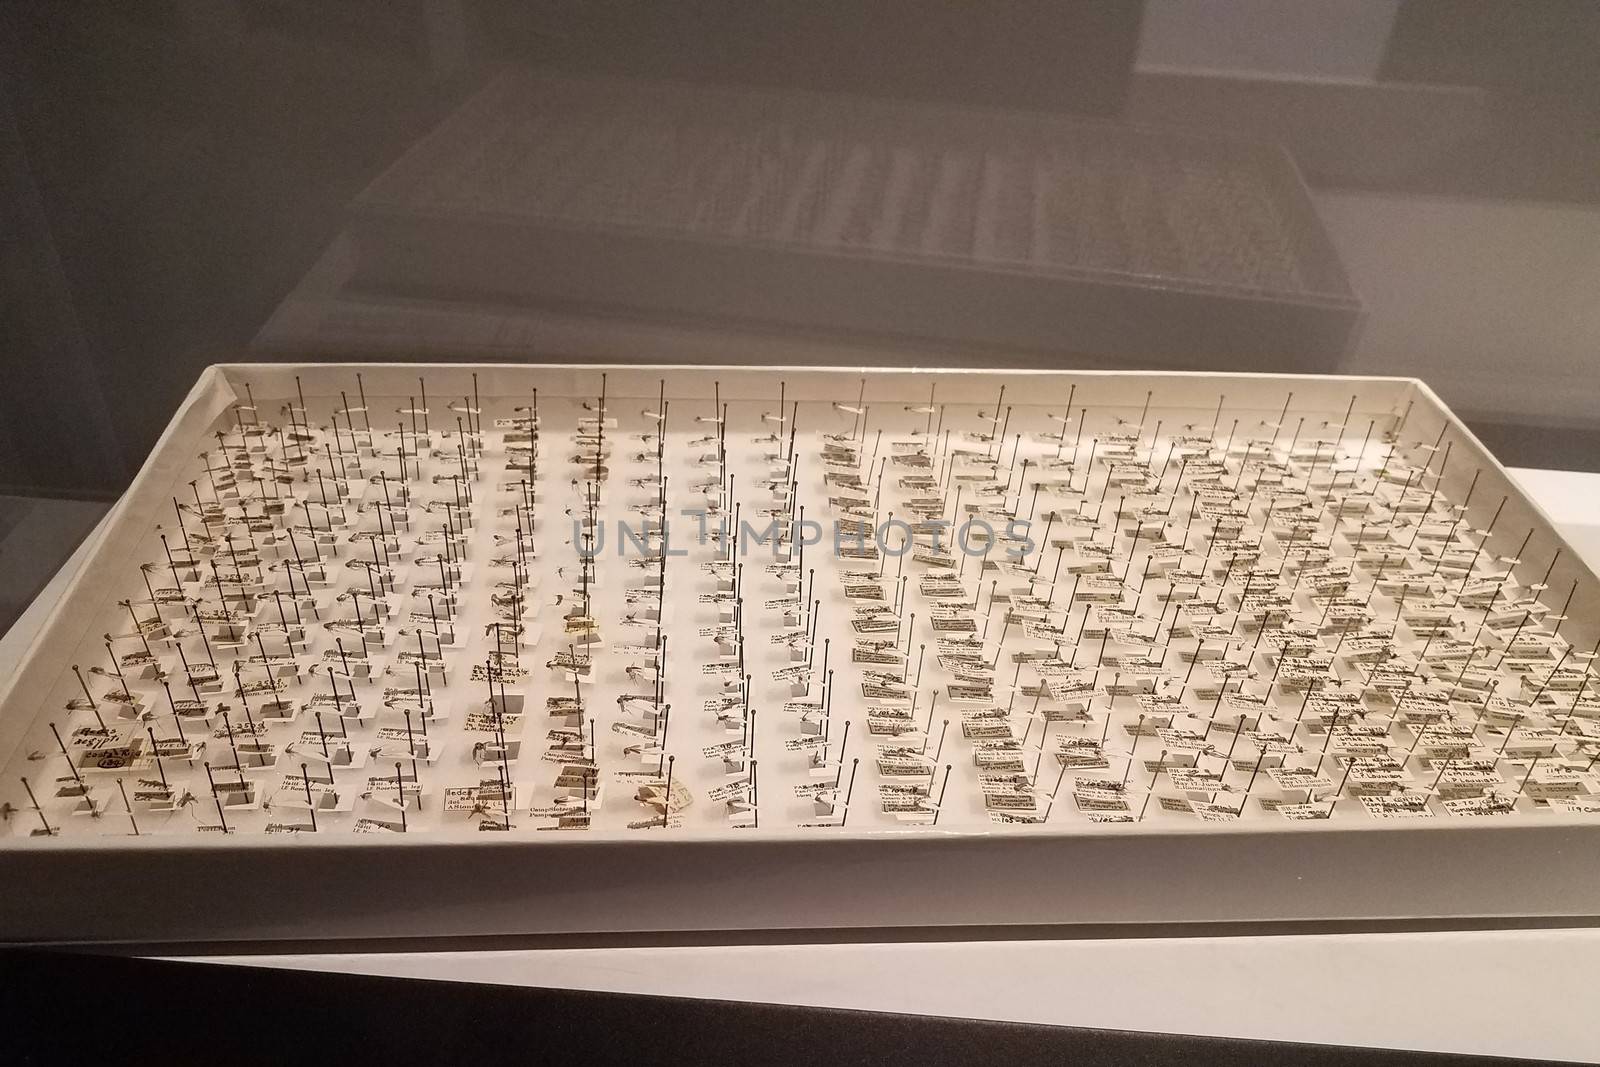 a box of collected mosquito insects with tags or labels